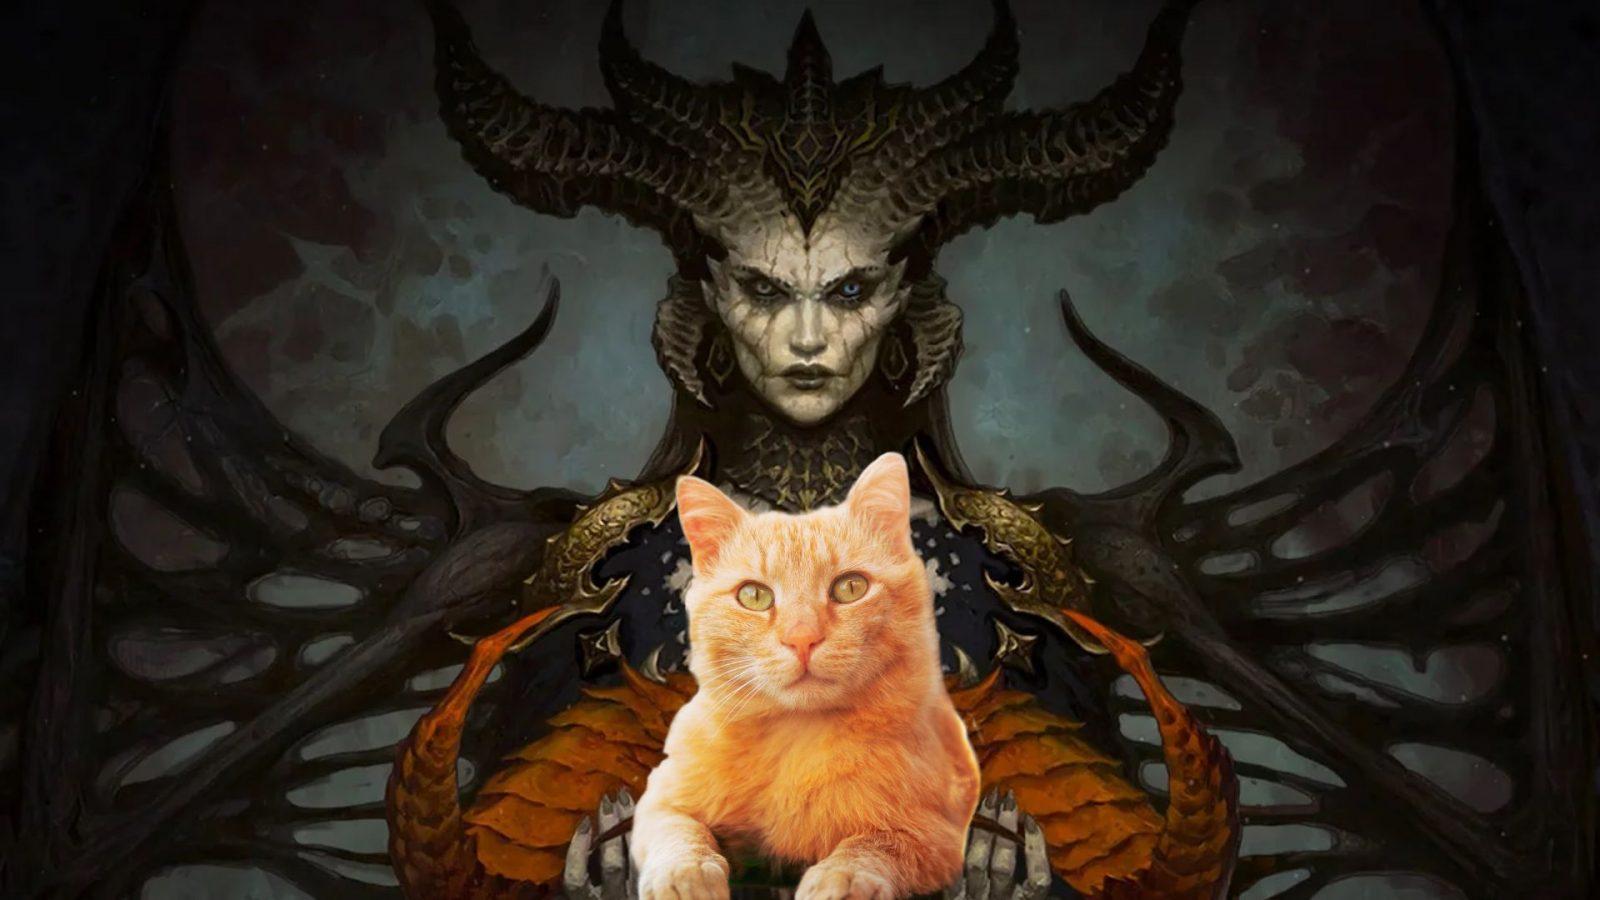 lilith holding cat in diablo 4